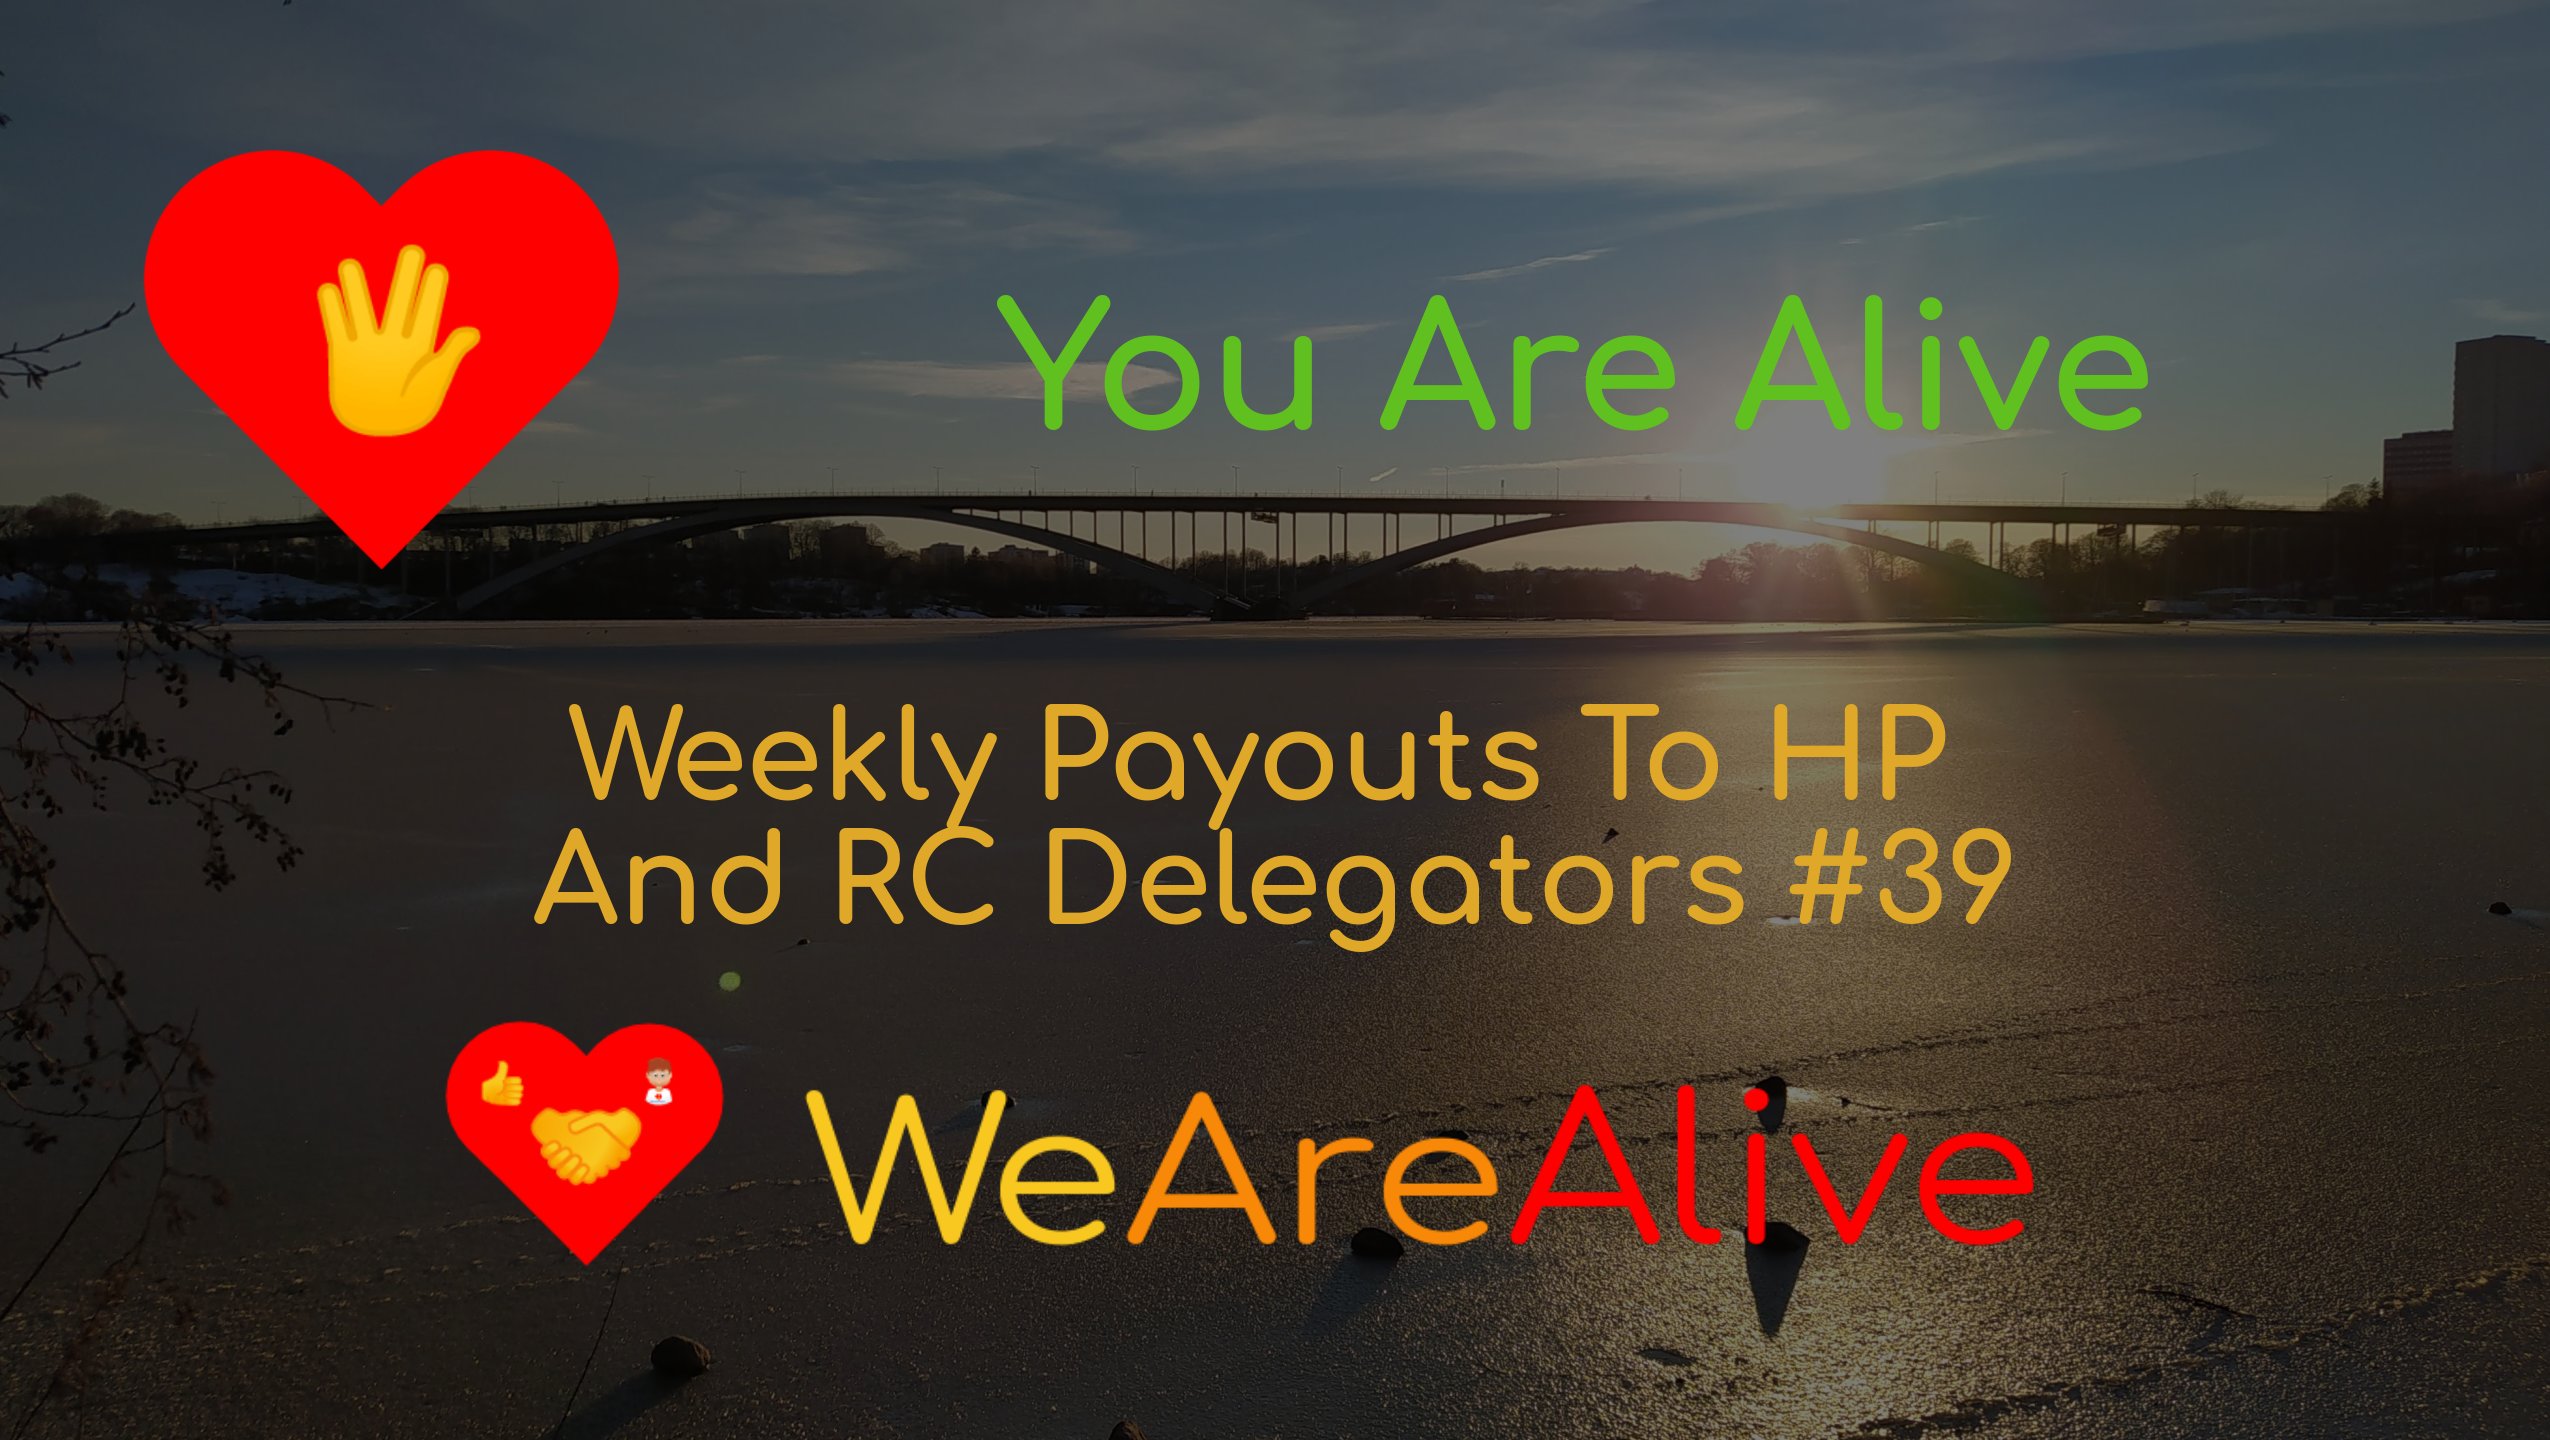 @youarealive/you-are-alive-weekly-payouts-to-hp-and-rc-delegators-39